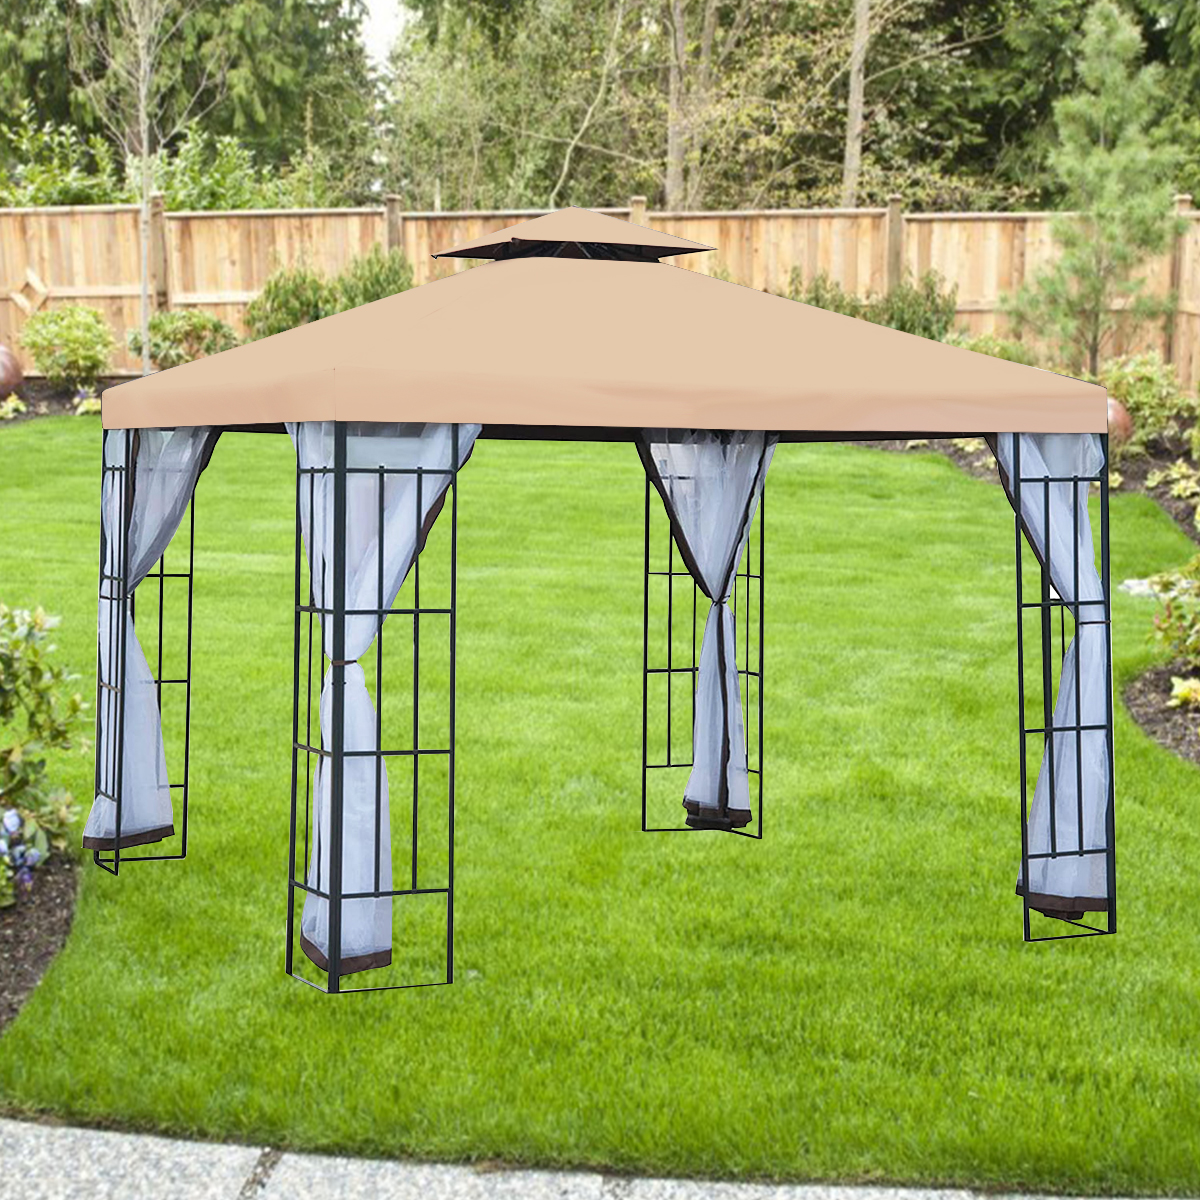 Replacement Canopy for 01-0153 10' x 10' Gazebo - Riplock 350